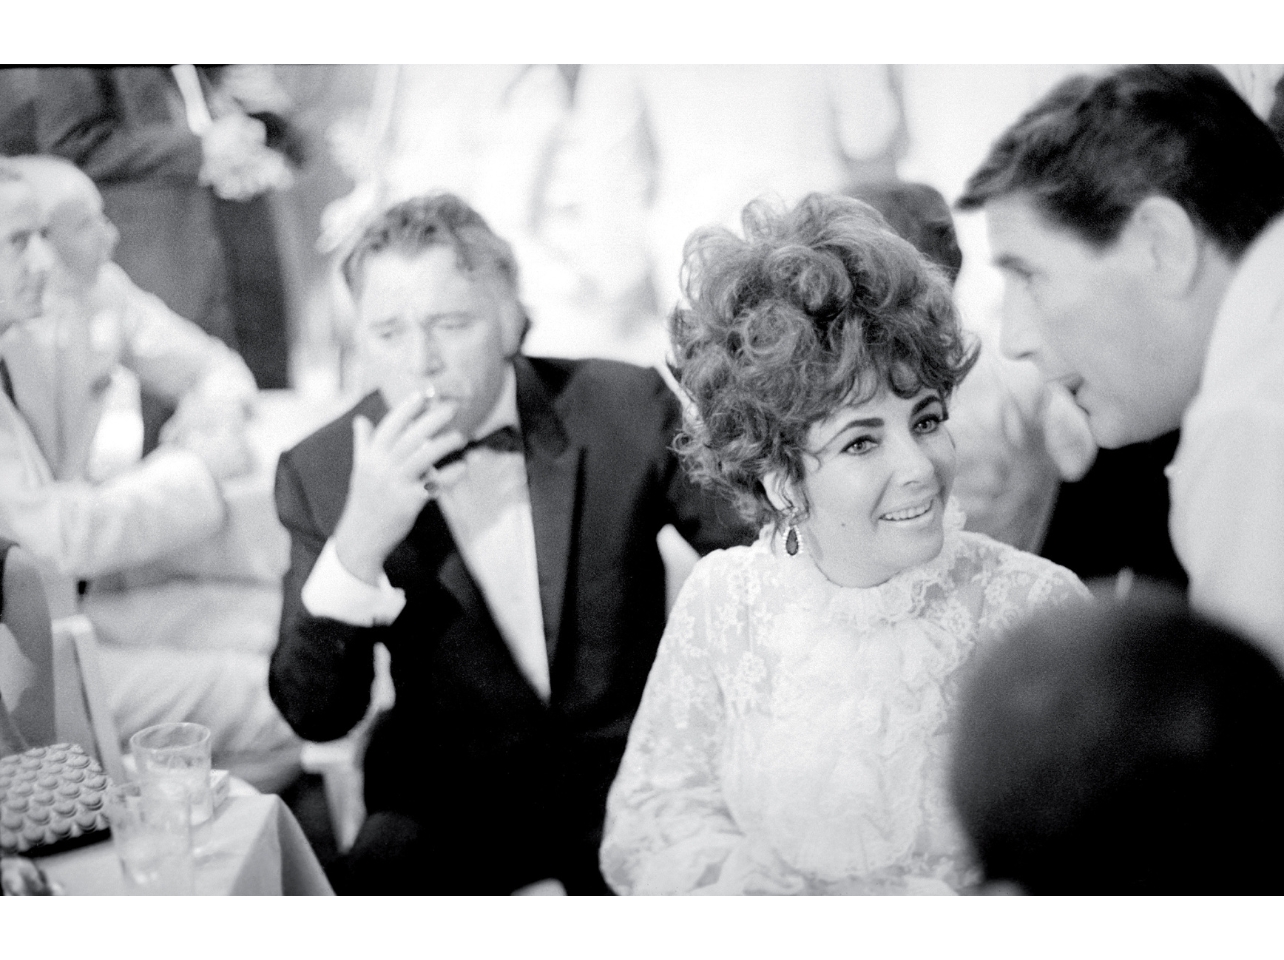 Black and white portrait of Richard Burton and Elizabeth Taylor at Marina Cicogna’s party, Venice 1967